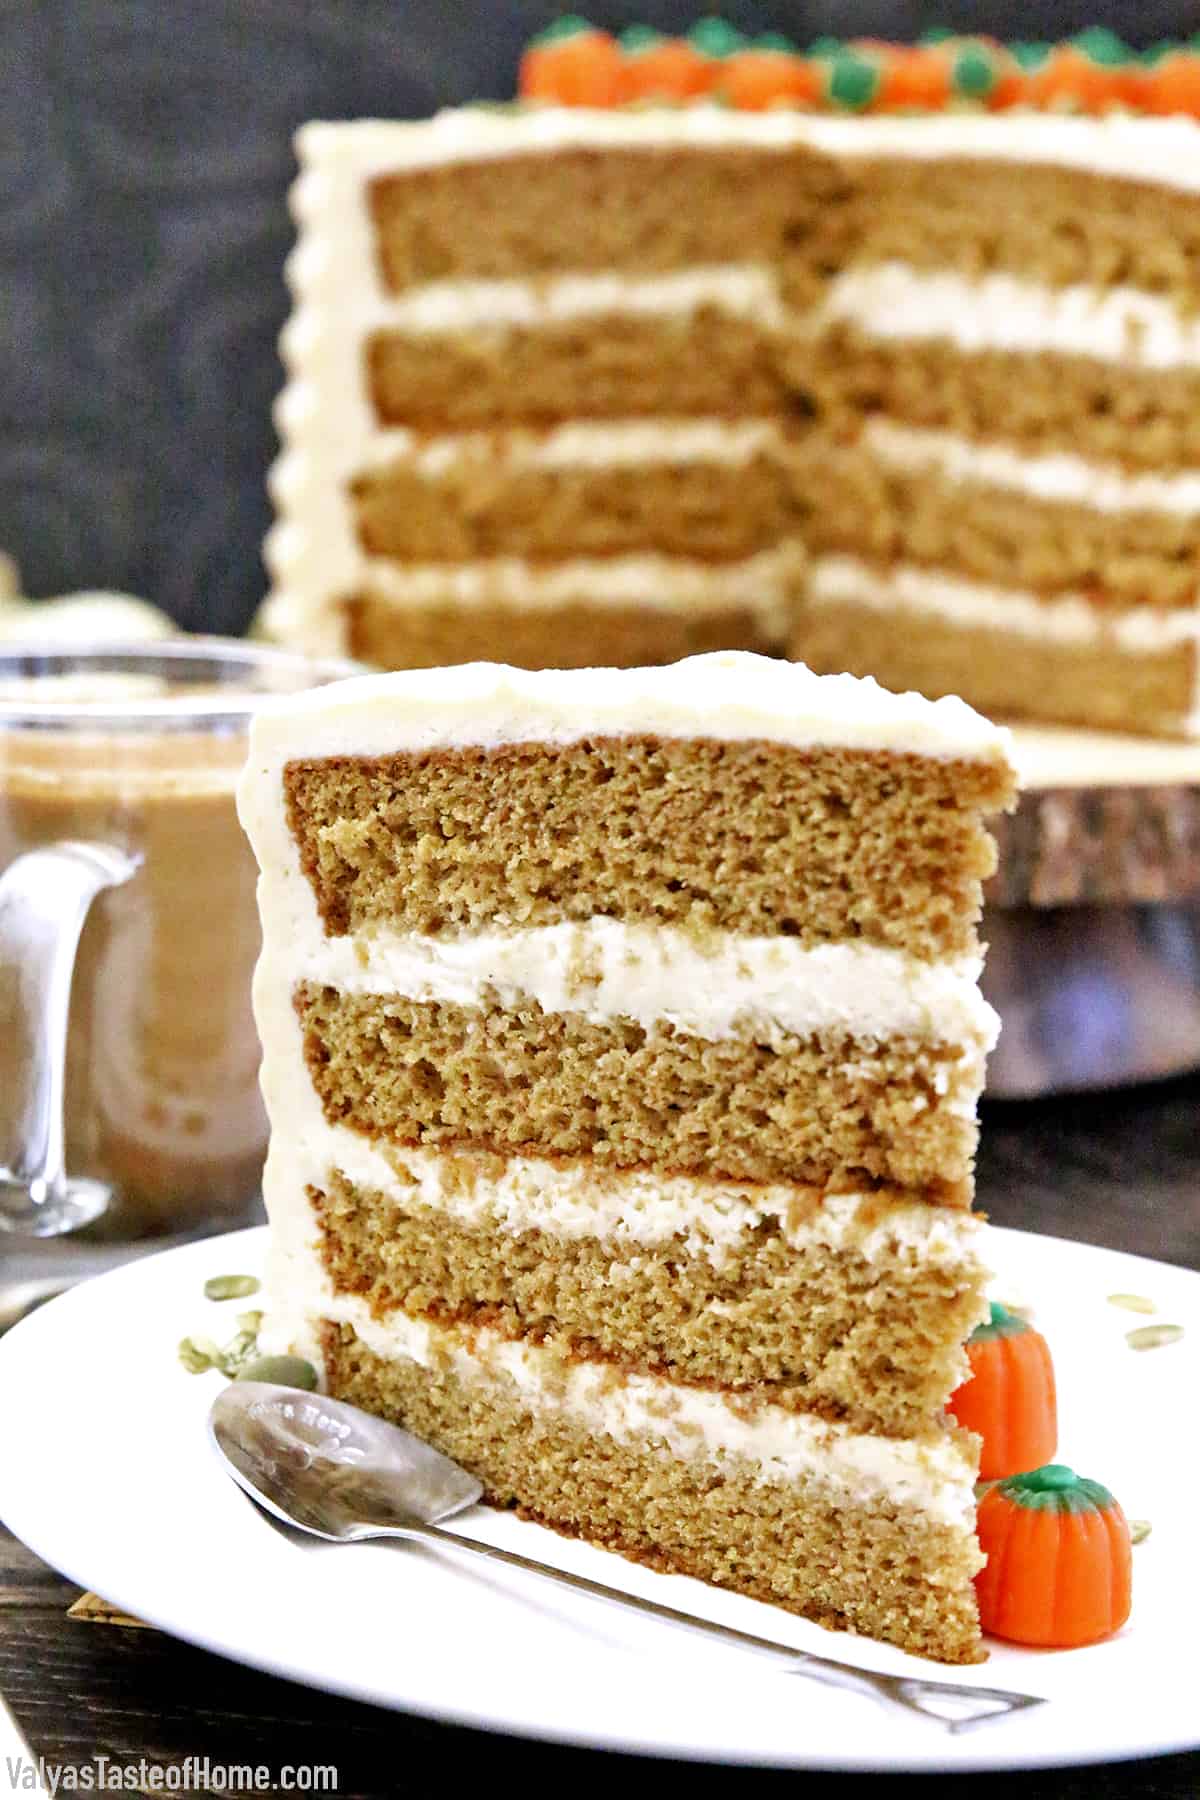 It is coffee. It is pumpkin. It is cake. All in one neat and delicious package! The sponge cake is tender and pillowy soft. Light, airy, moist, bursting with all the cravealbe Fall flavors: creamy pumpkin spice and coffee